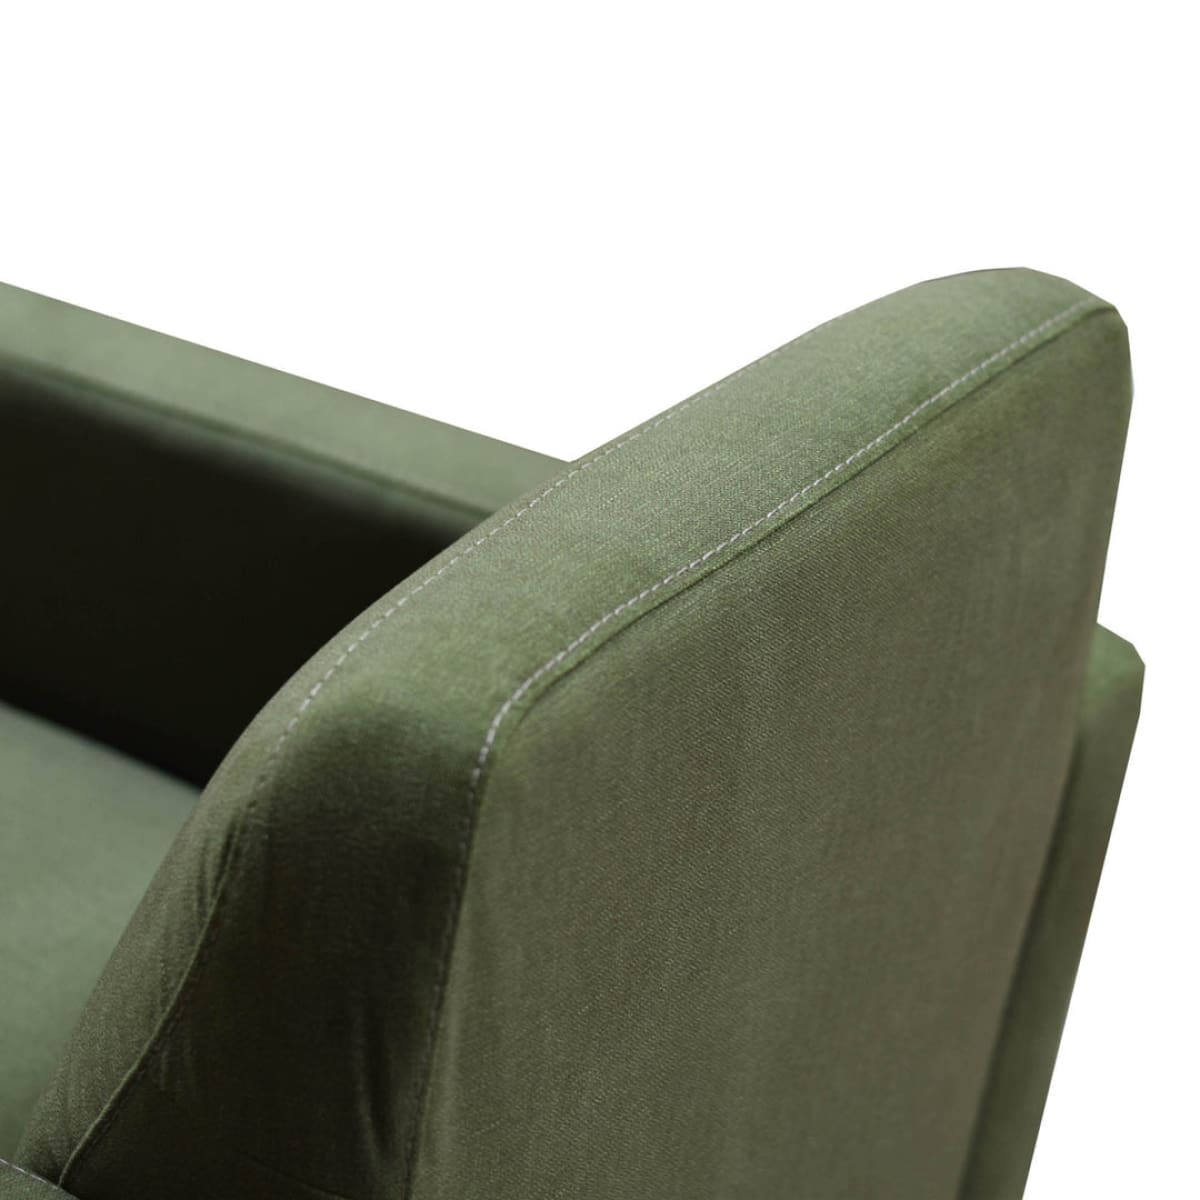 Cooper Swivel Club Chair - Forrest Green - lh-import-accent-club-chairs